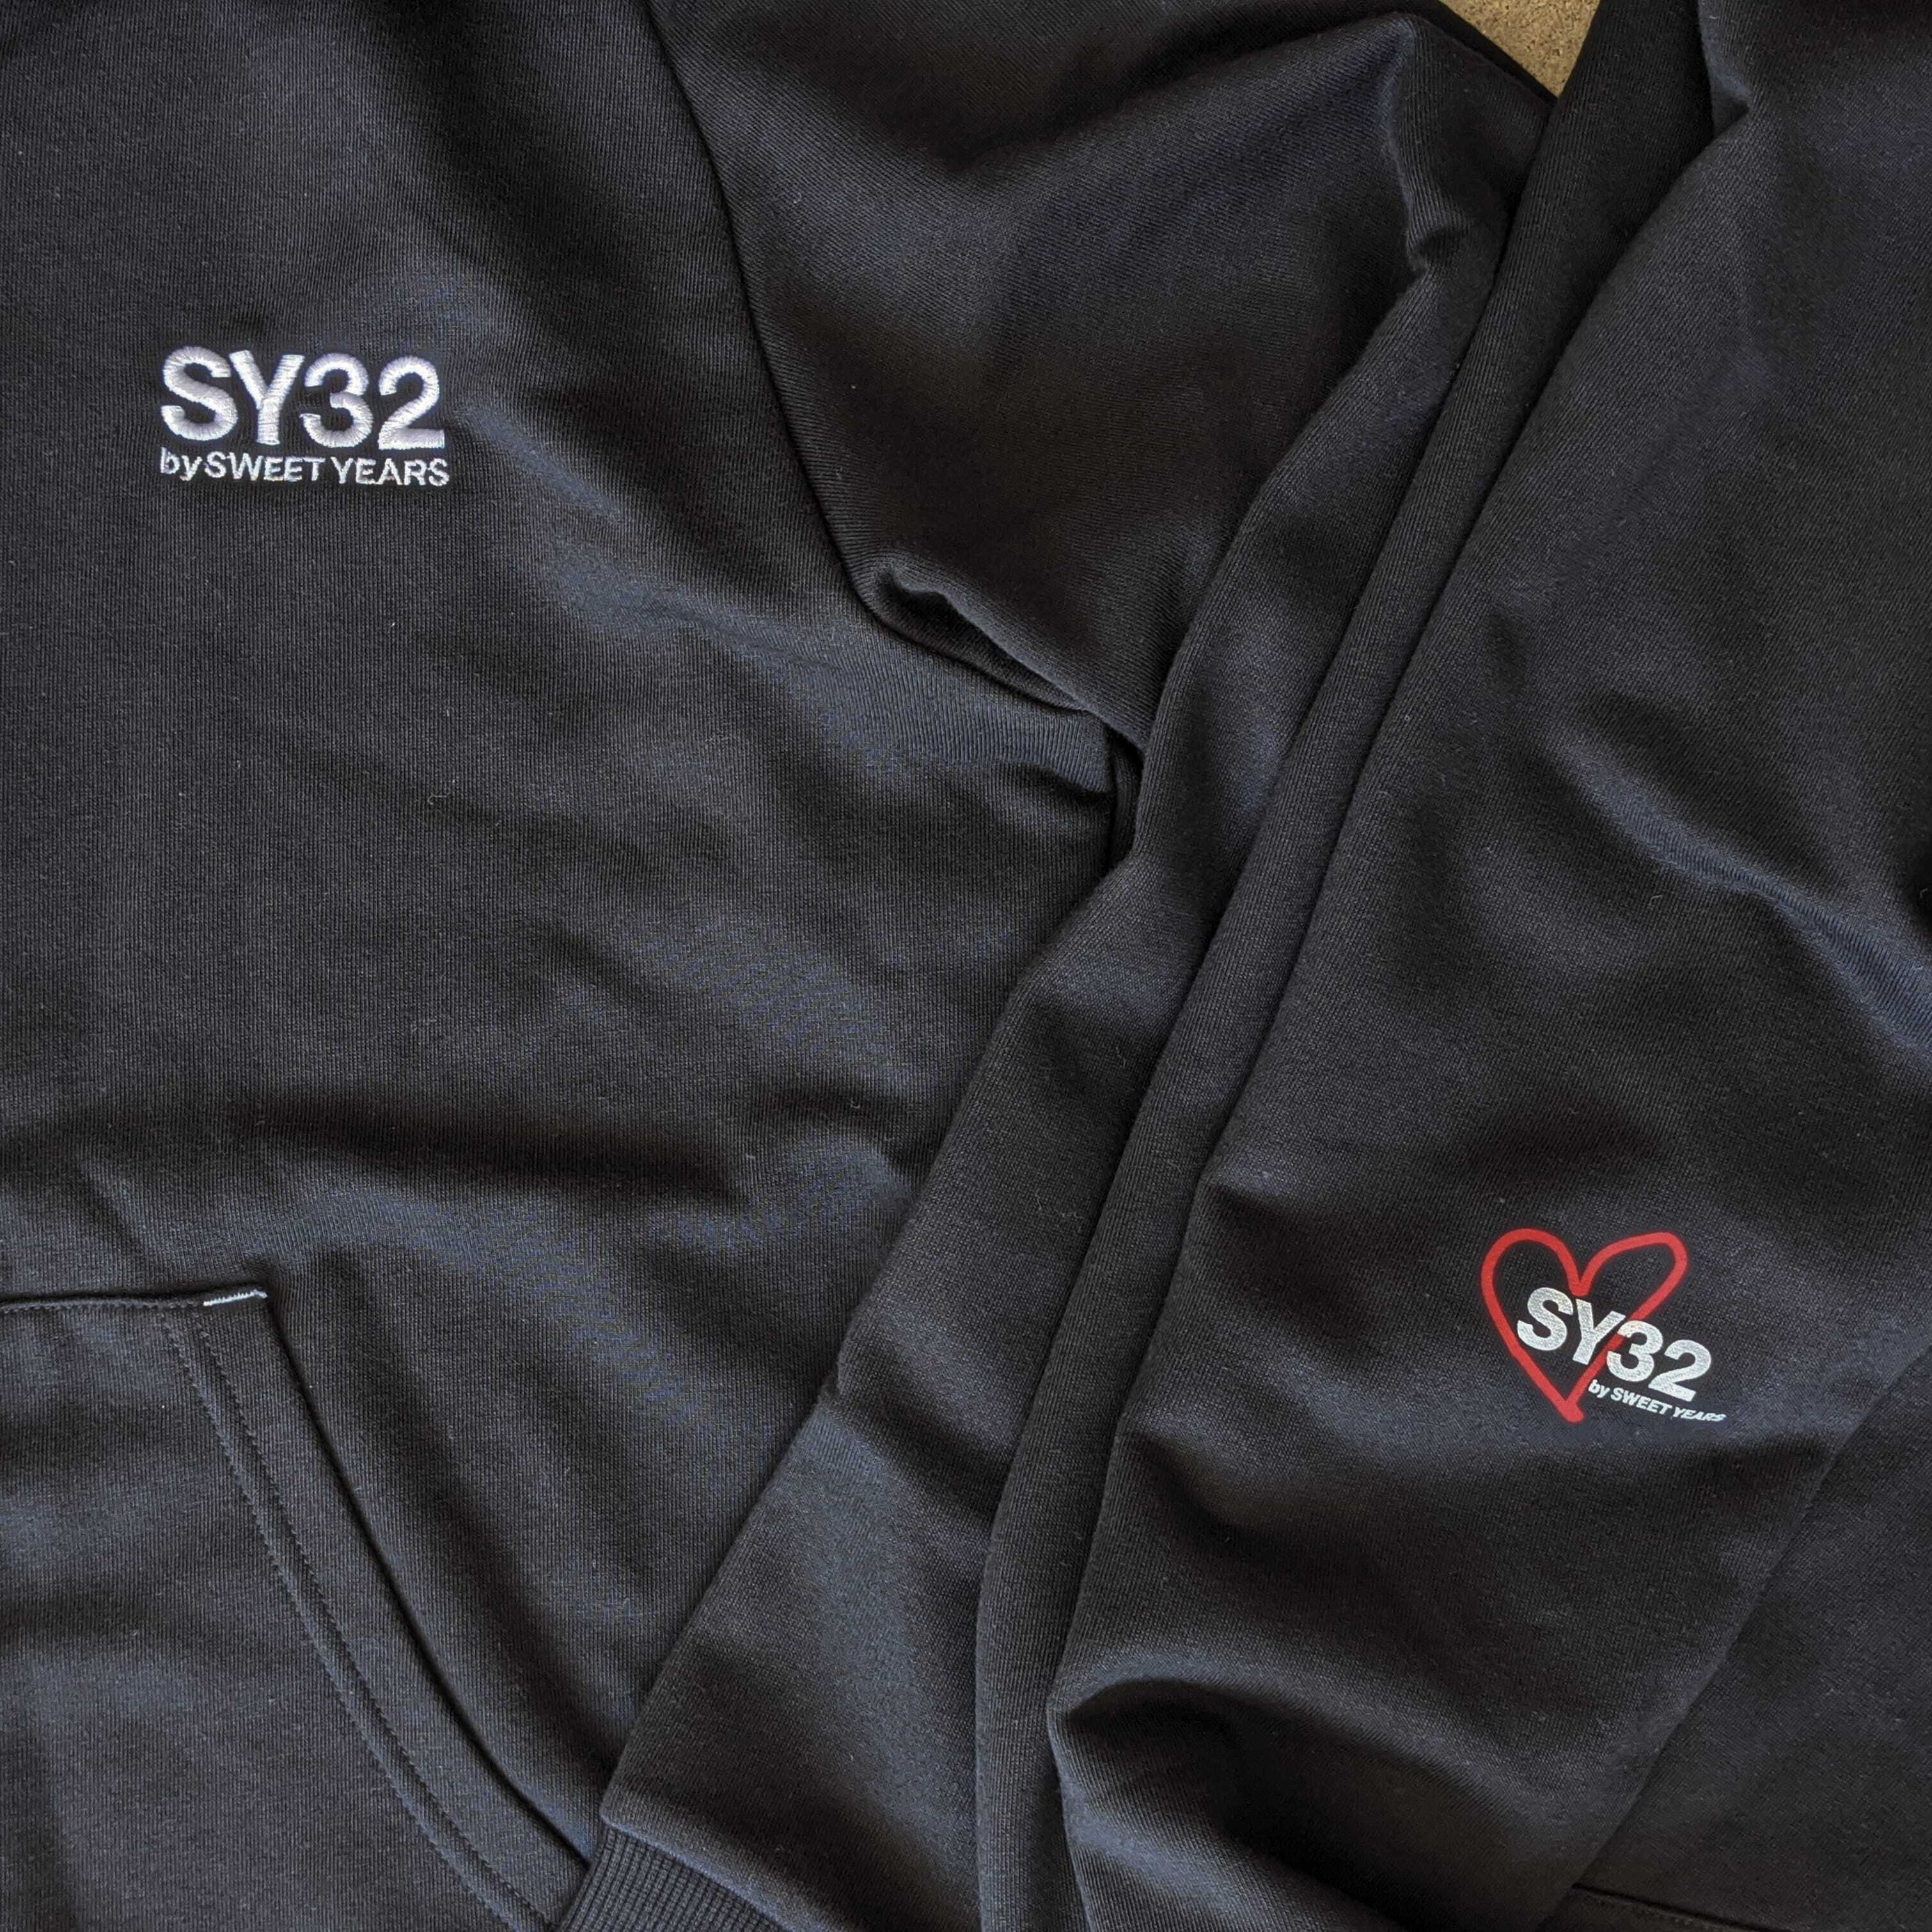 SY32 by SWEET YEARS 